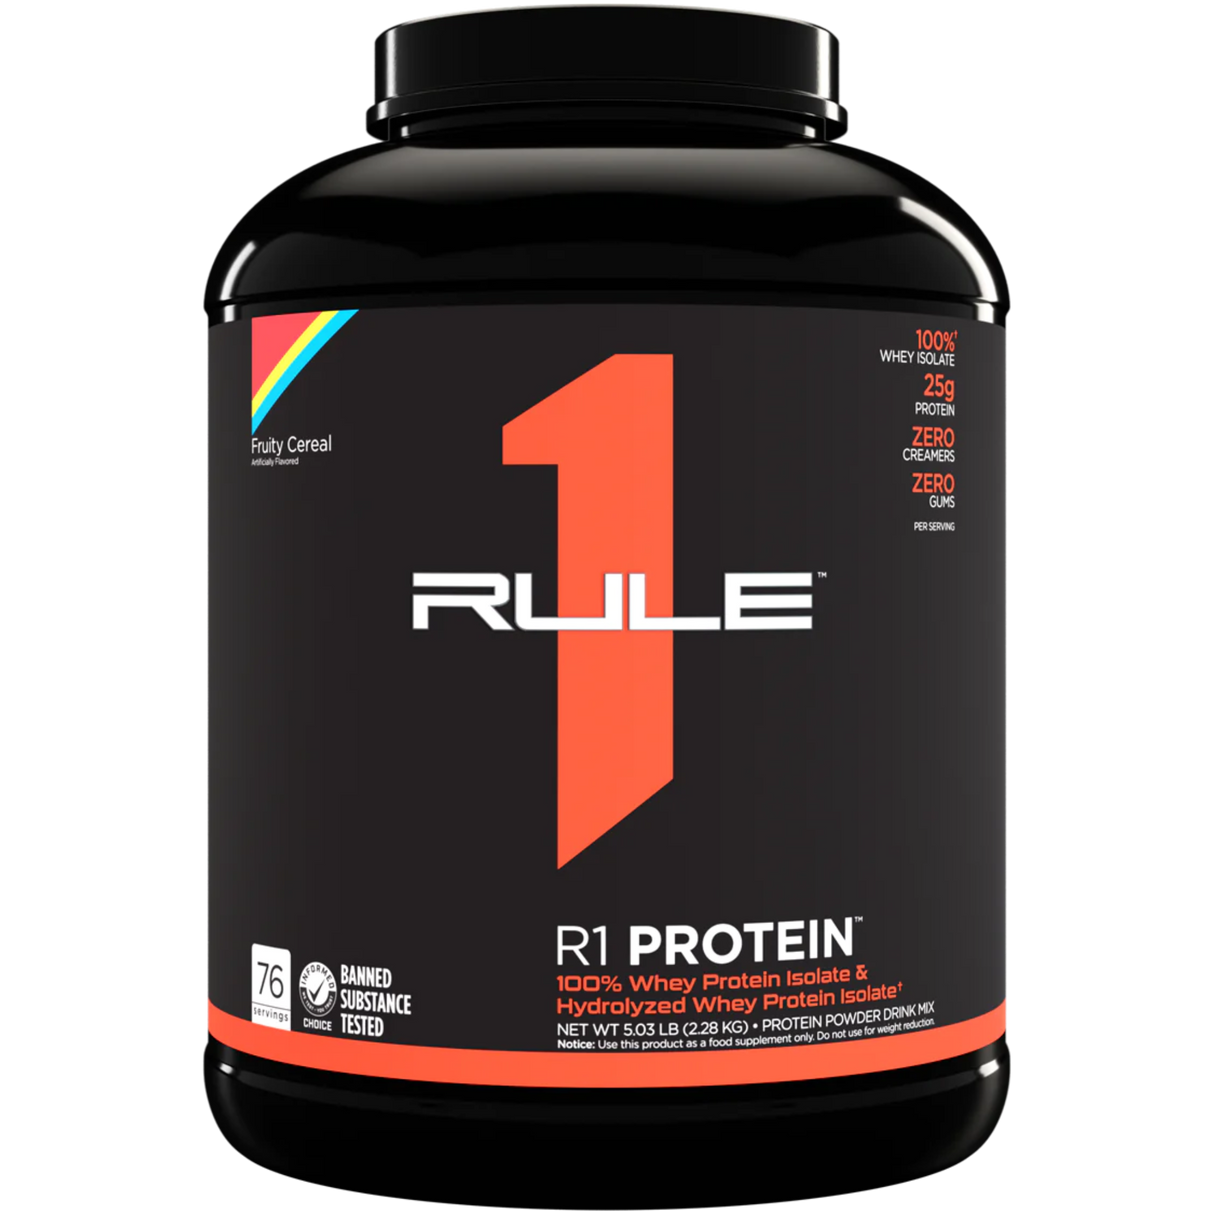 R1 Protein - Kingpin Supplements 